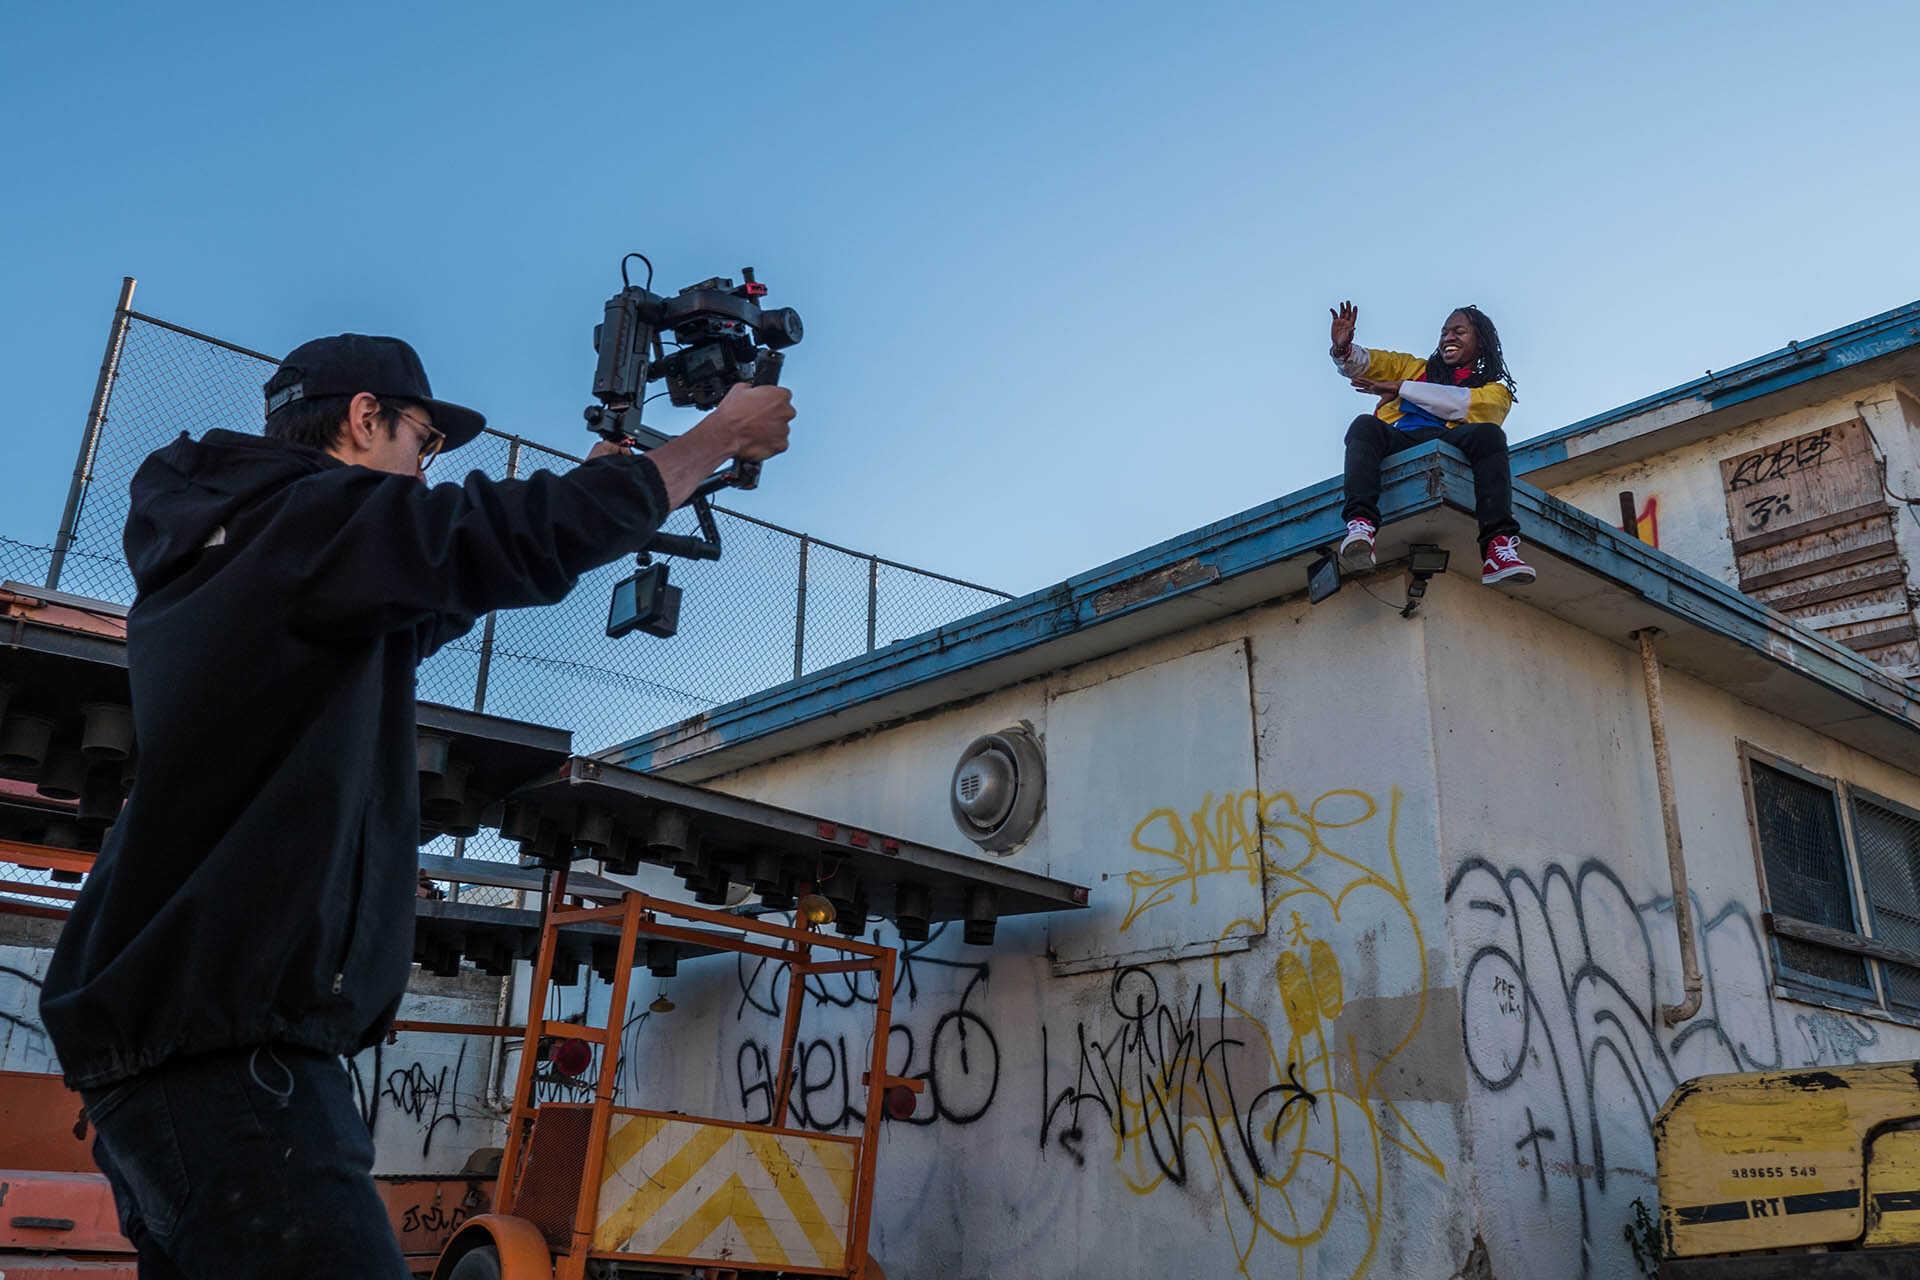 Female sitting on a roof waving at male holding a camera